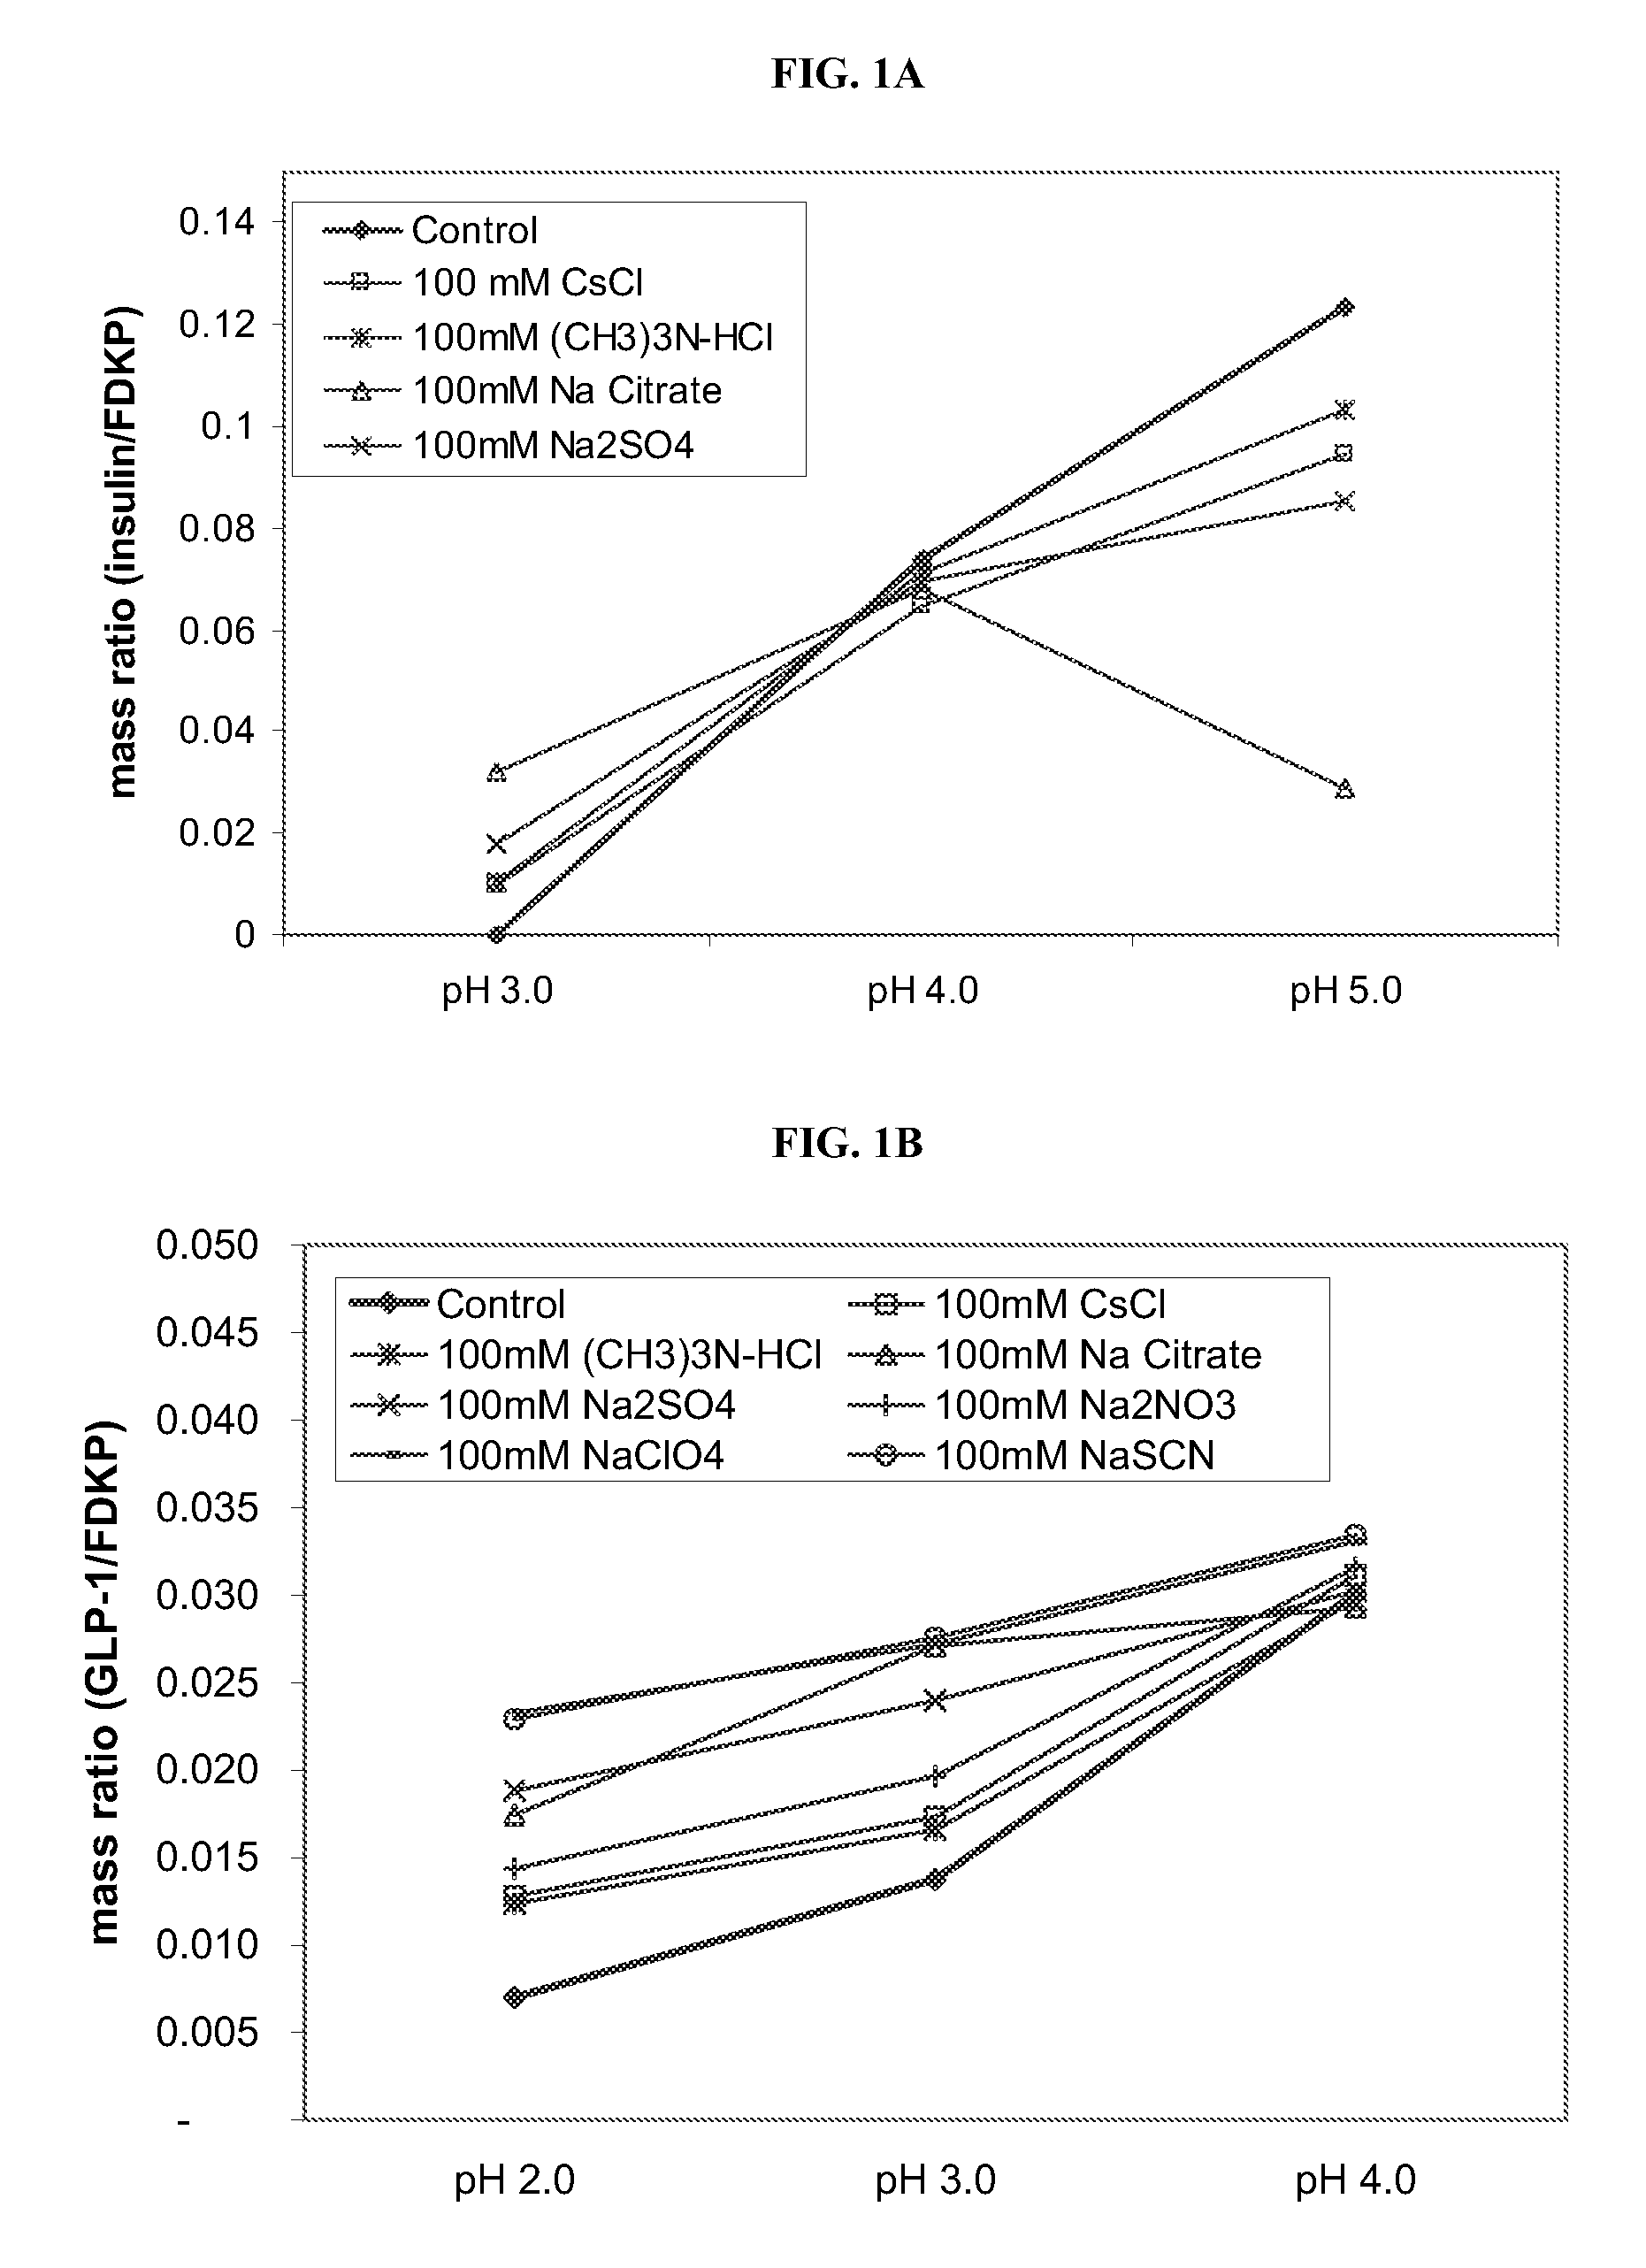 Method of Drug Formulation Based on Increasing the Affinity of Active Agents for Crystalline Microparticle Surfaces